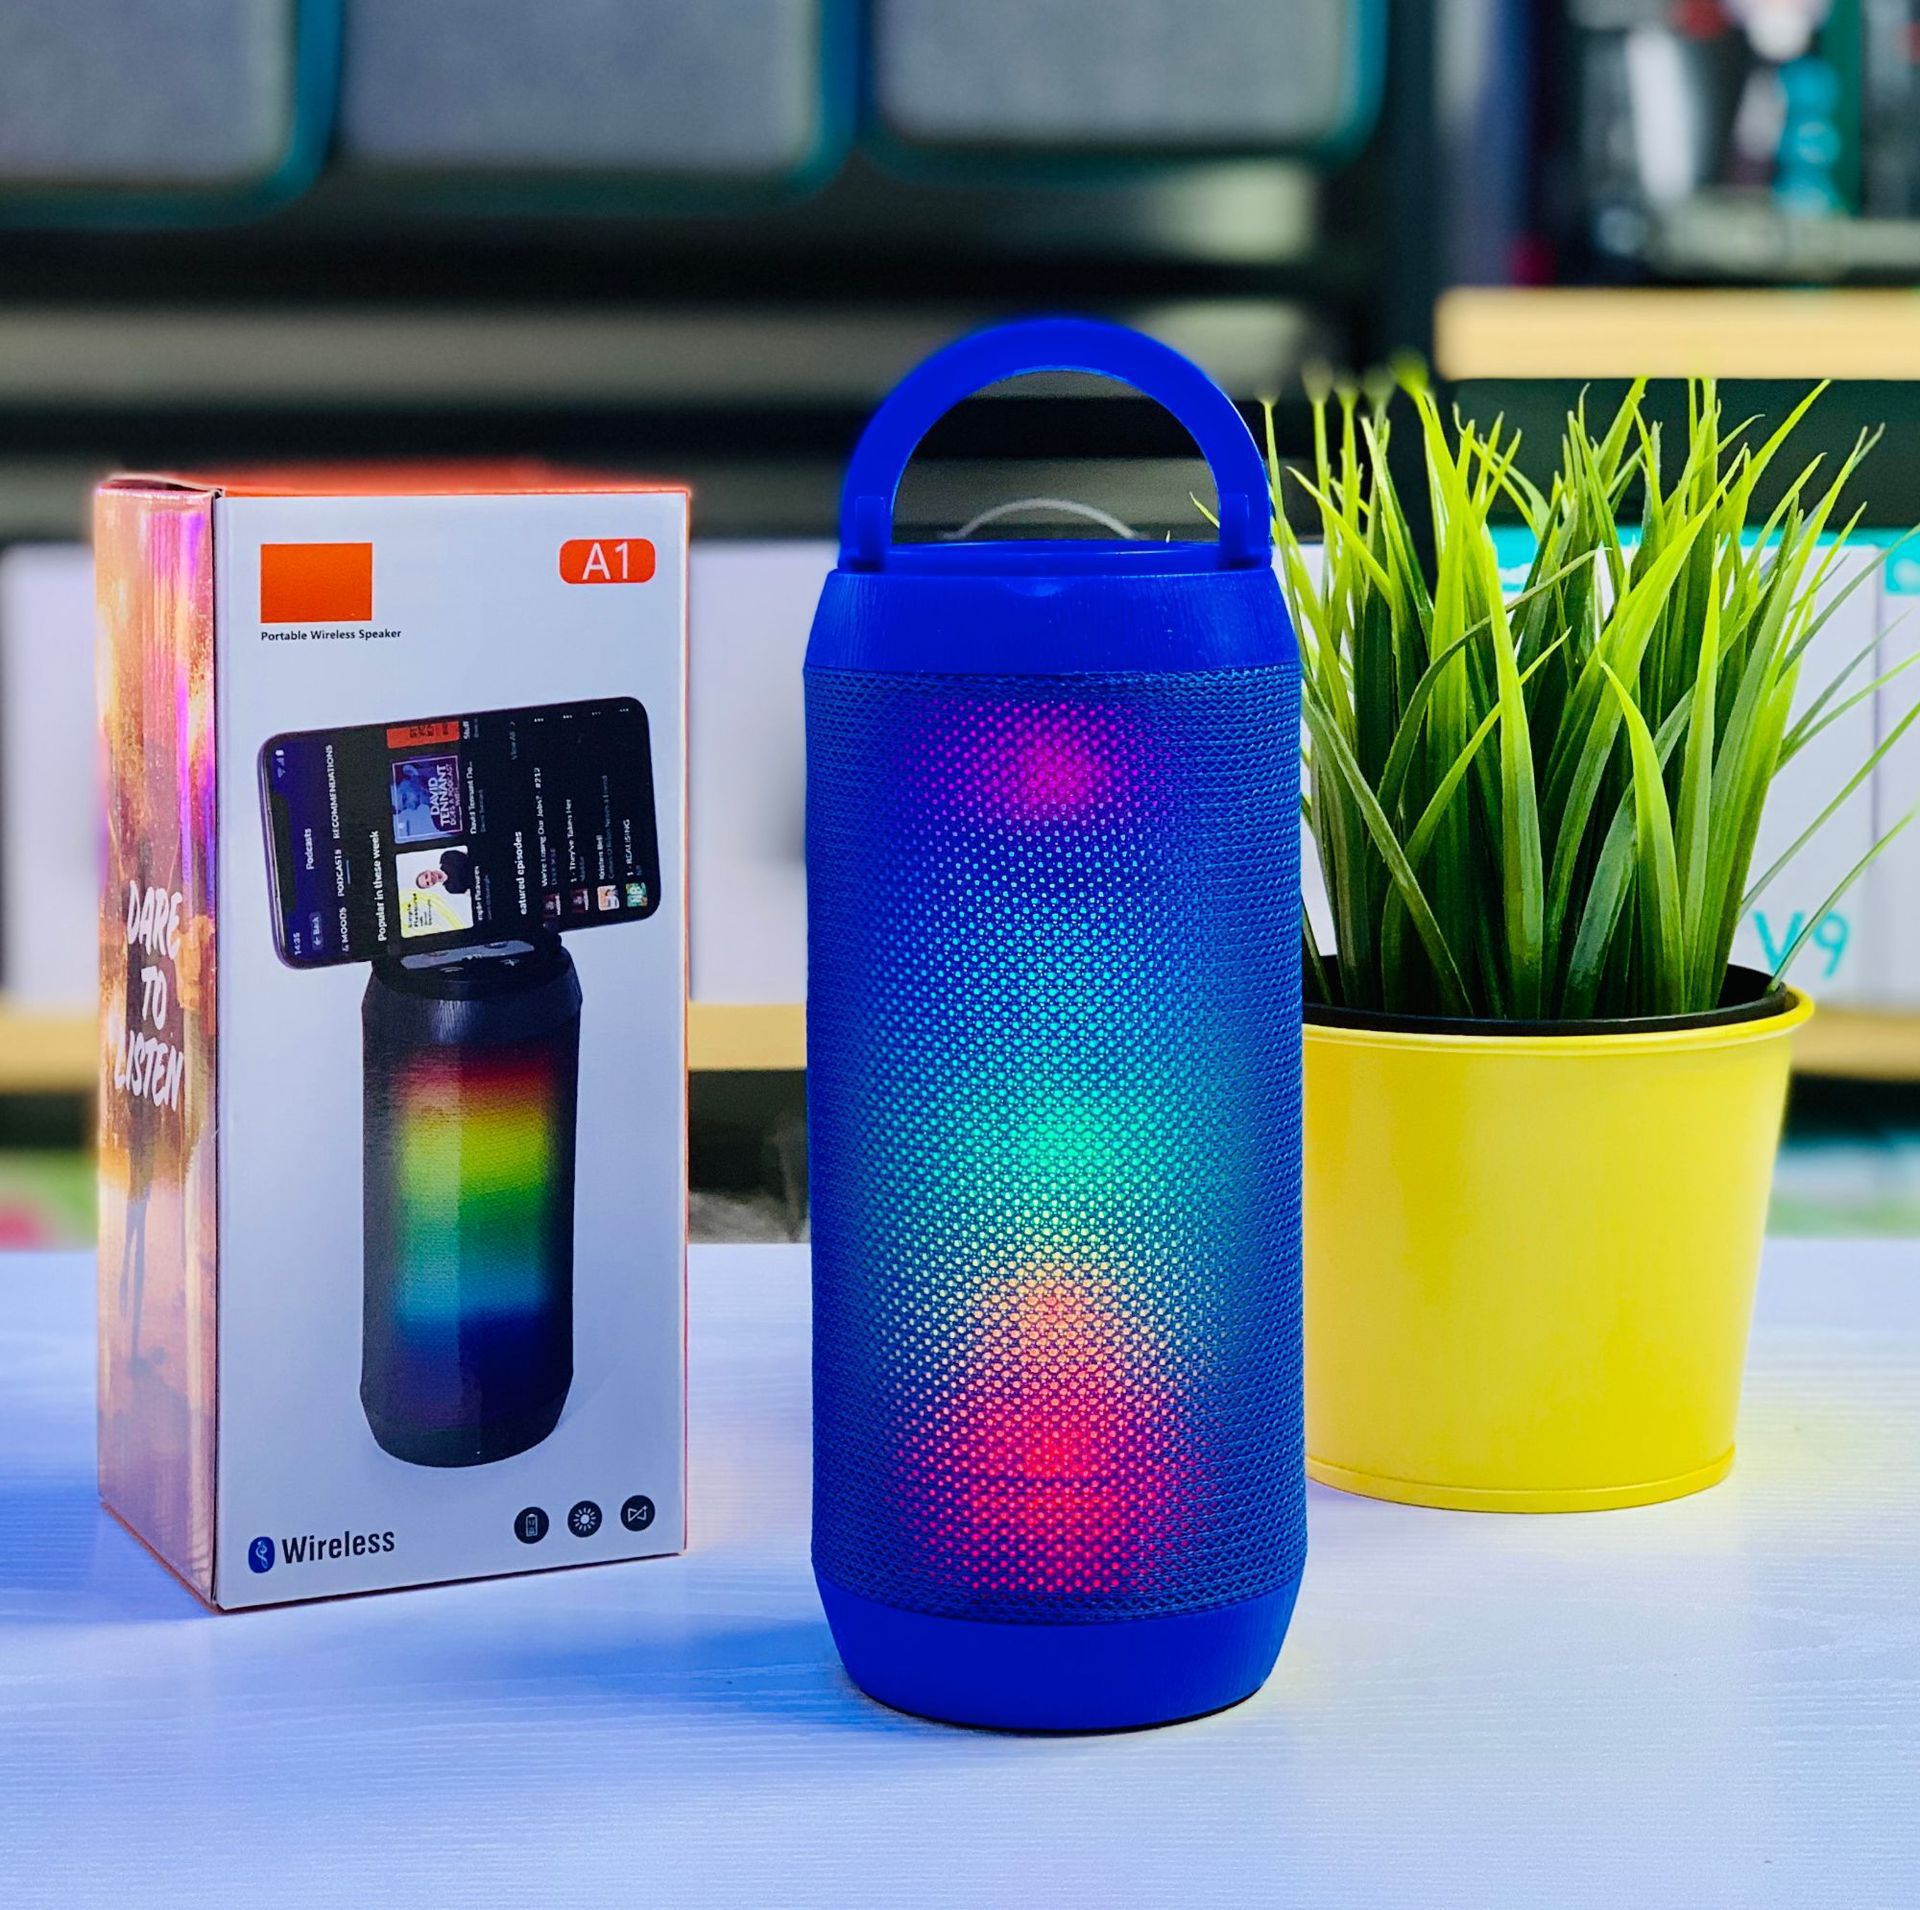 LED Color Light Wireless Bluetooth Portable SPEAKER with Colorful Display A1 (Blue)